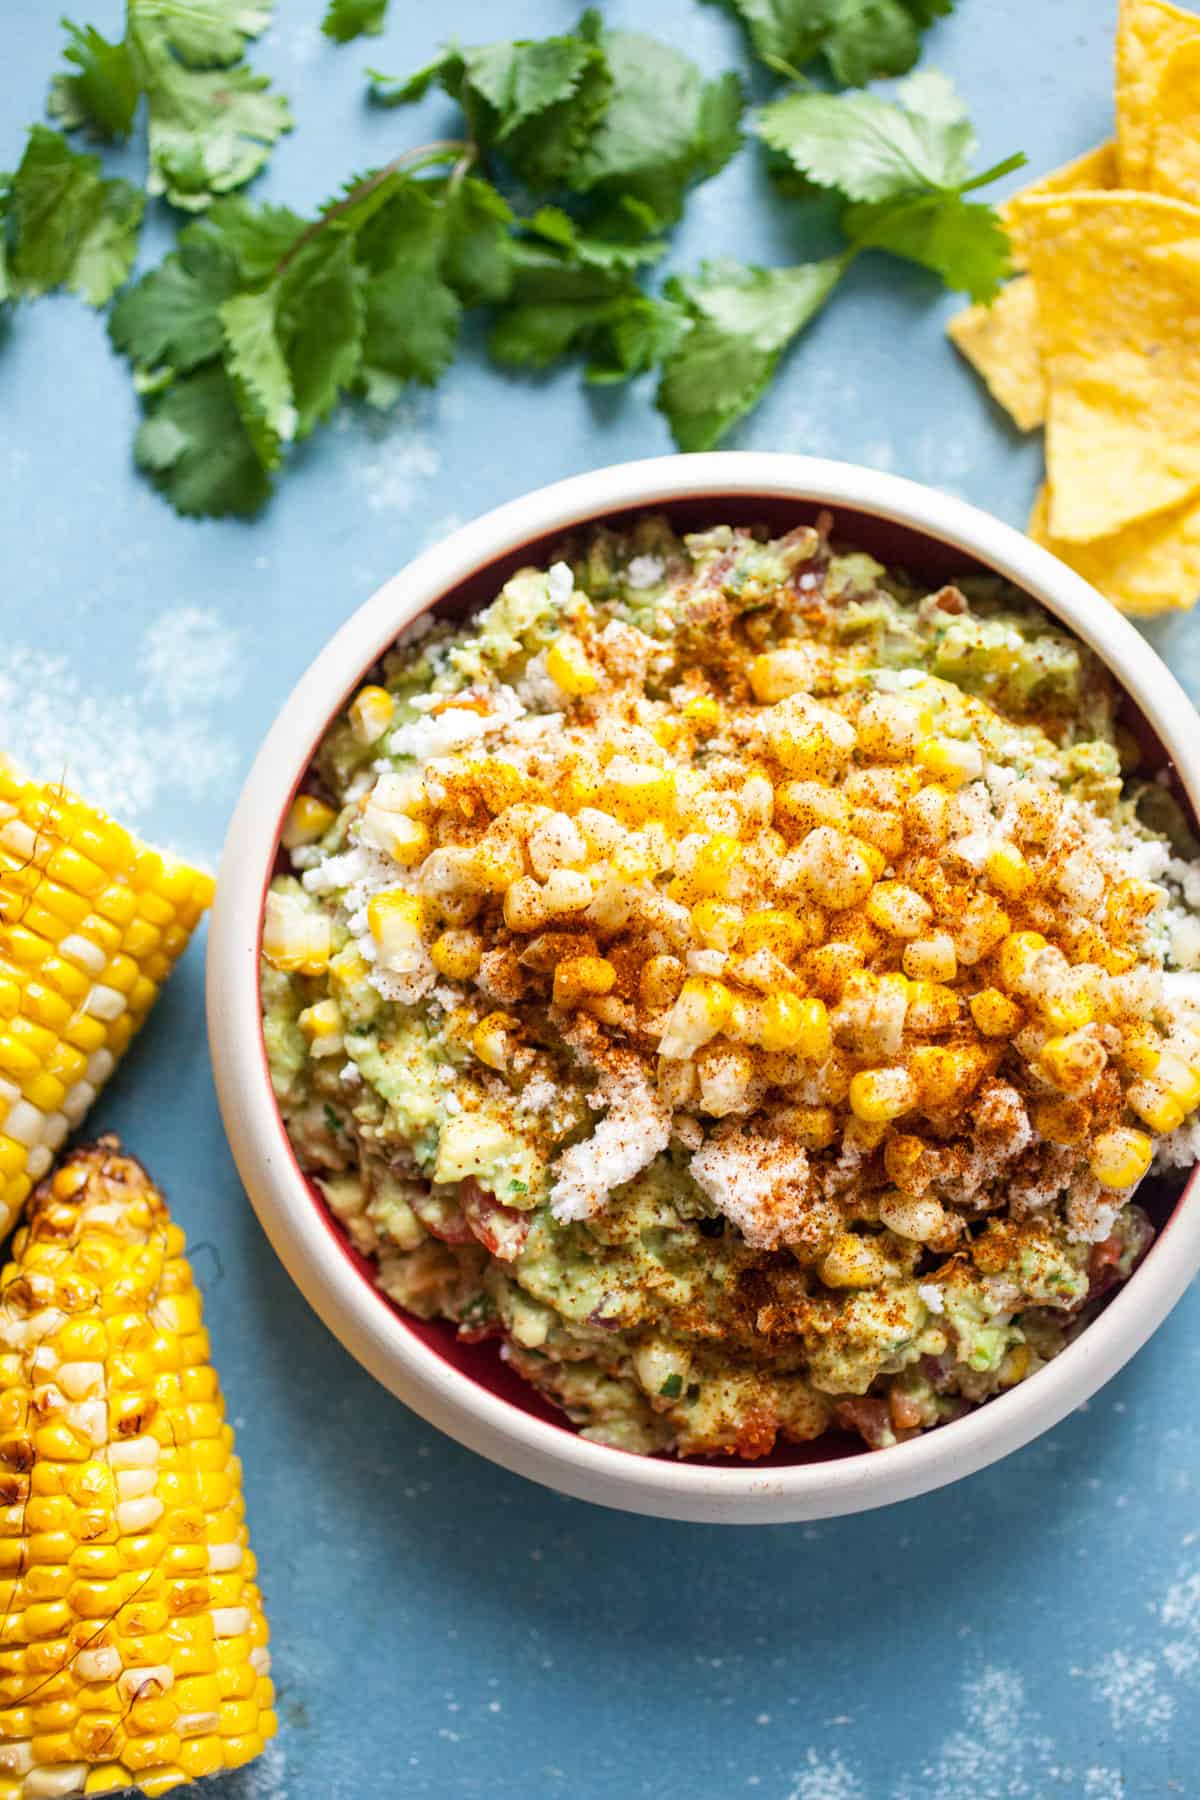 Street Corn Guacamole: Homemade guacamole mixed with a few simple, but perfect add-ins that mimic Mexican street corn (elote)! Roasted corn, cotija cheese, chili powder, cilantro, and a few other goodies. Perfect for a party! | macheesmo.com